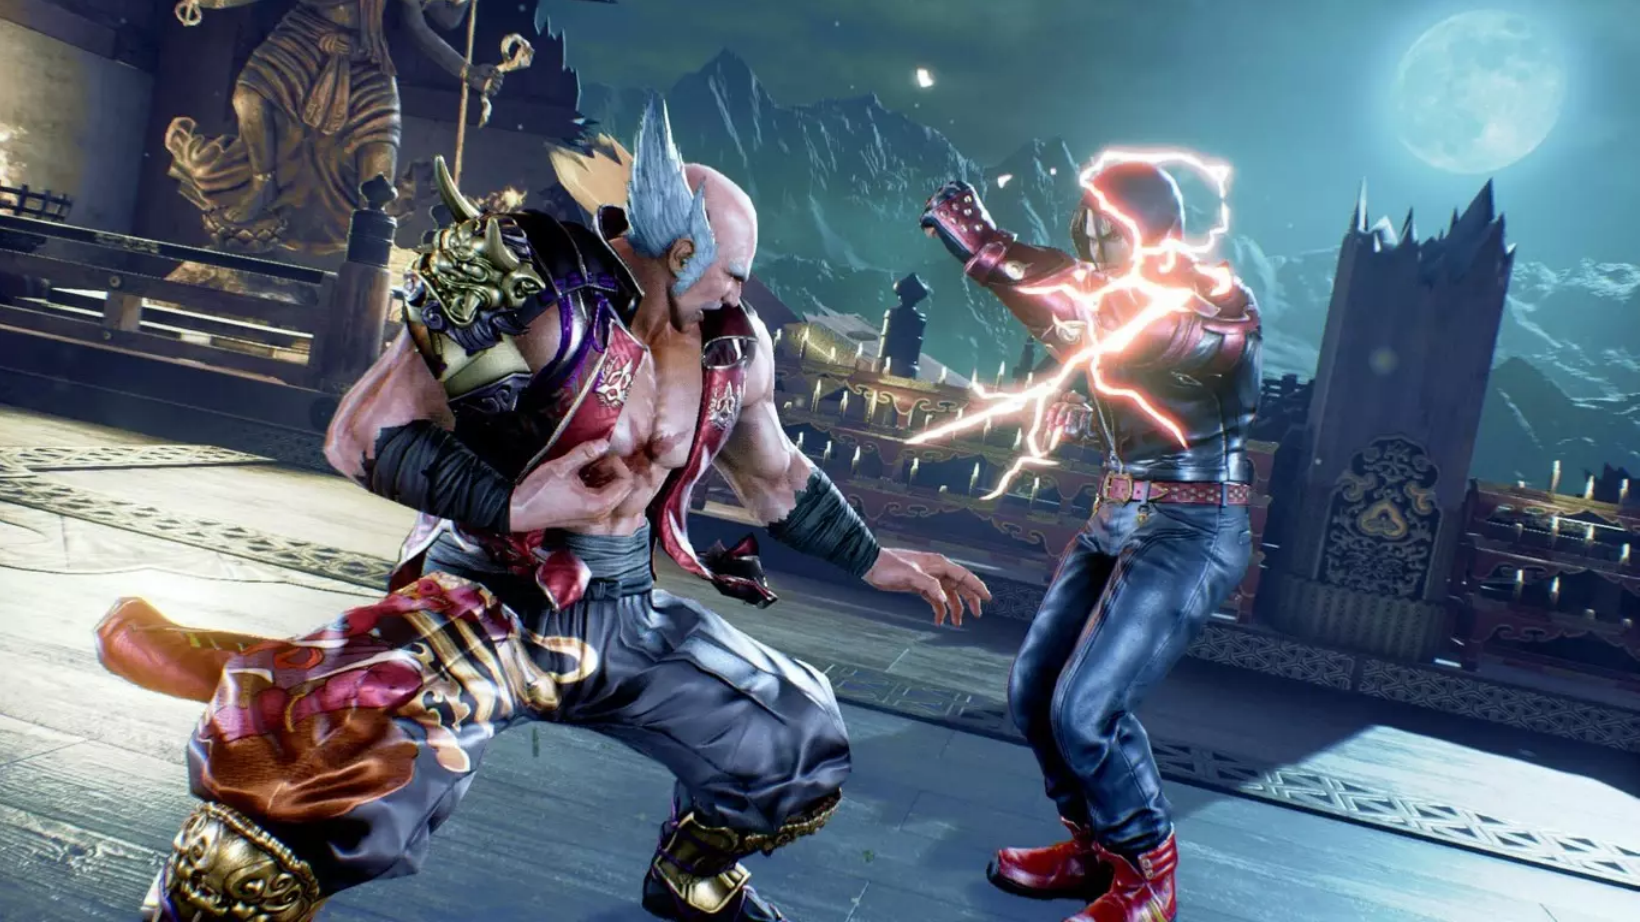 Tekken 8 move list for Raven, Azucena, and Feng released